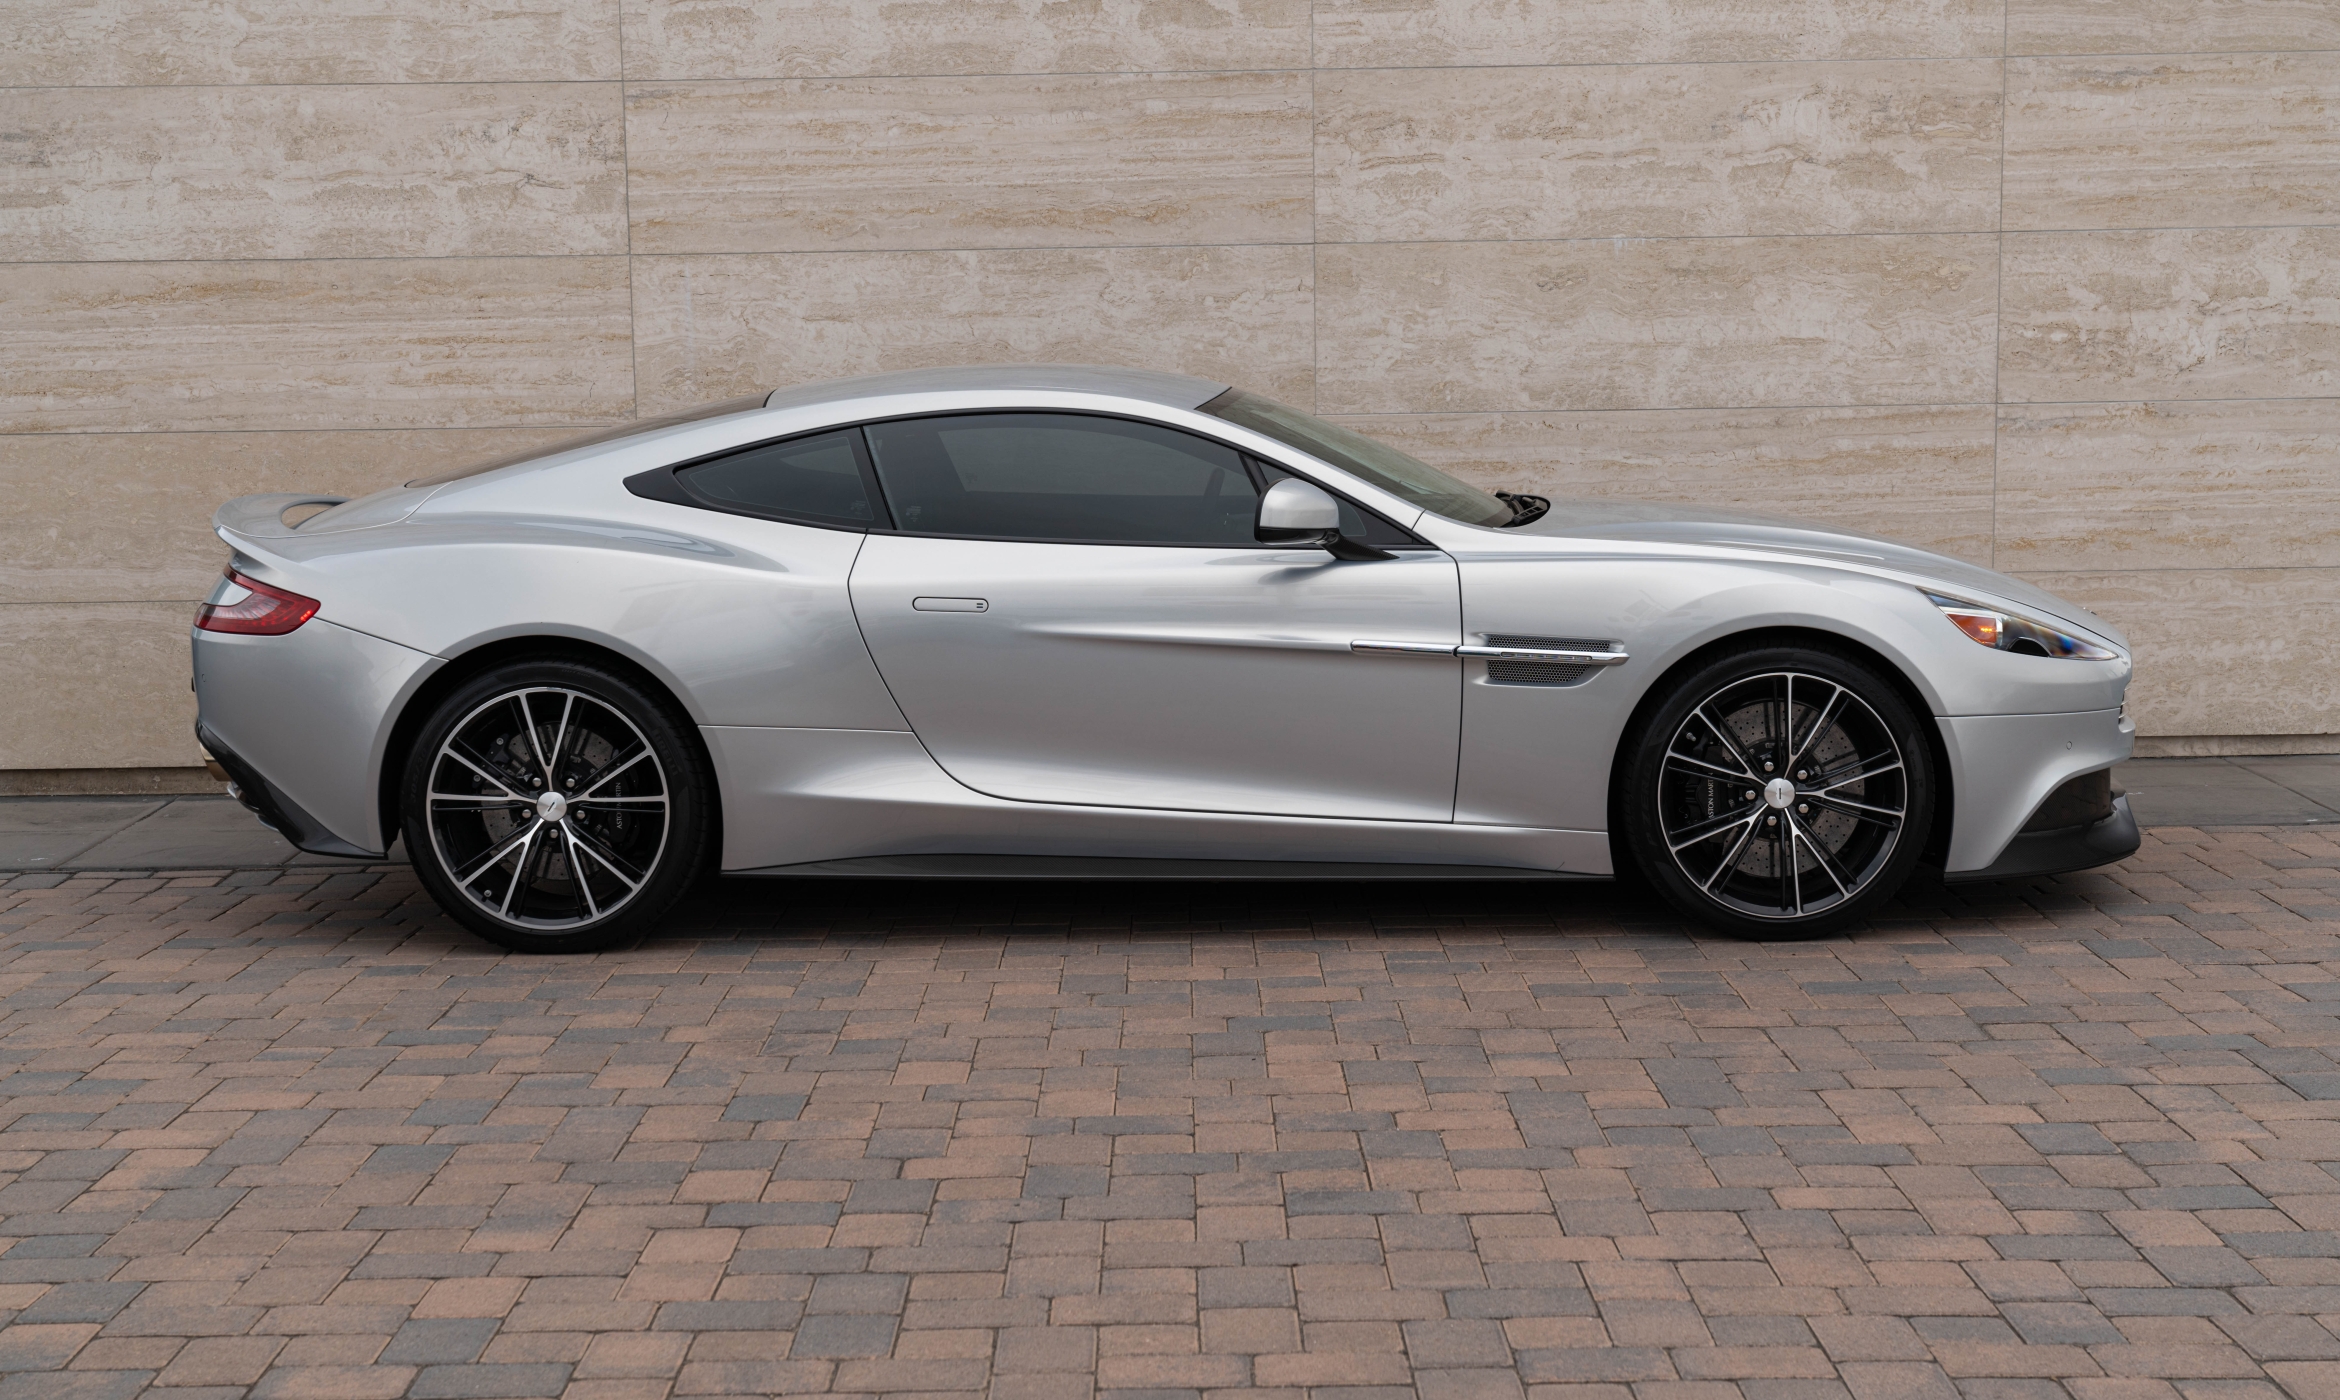 Used 2017 Aston Martin Vanquish Base with VIN SCFLMCFU8HGJ03314 for sale in San Diego, CA